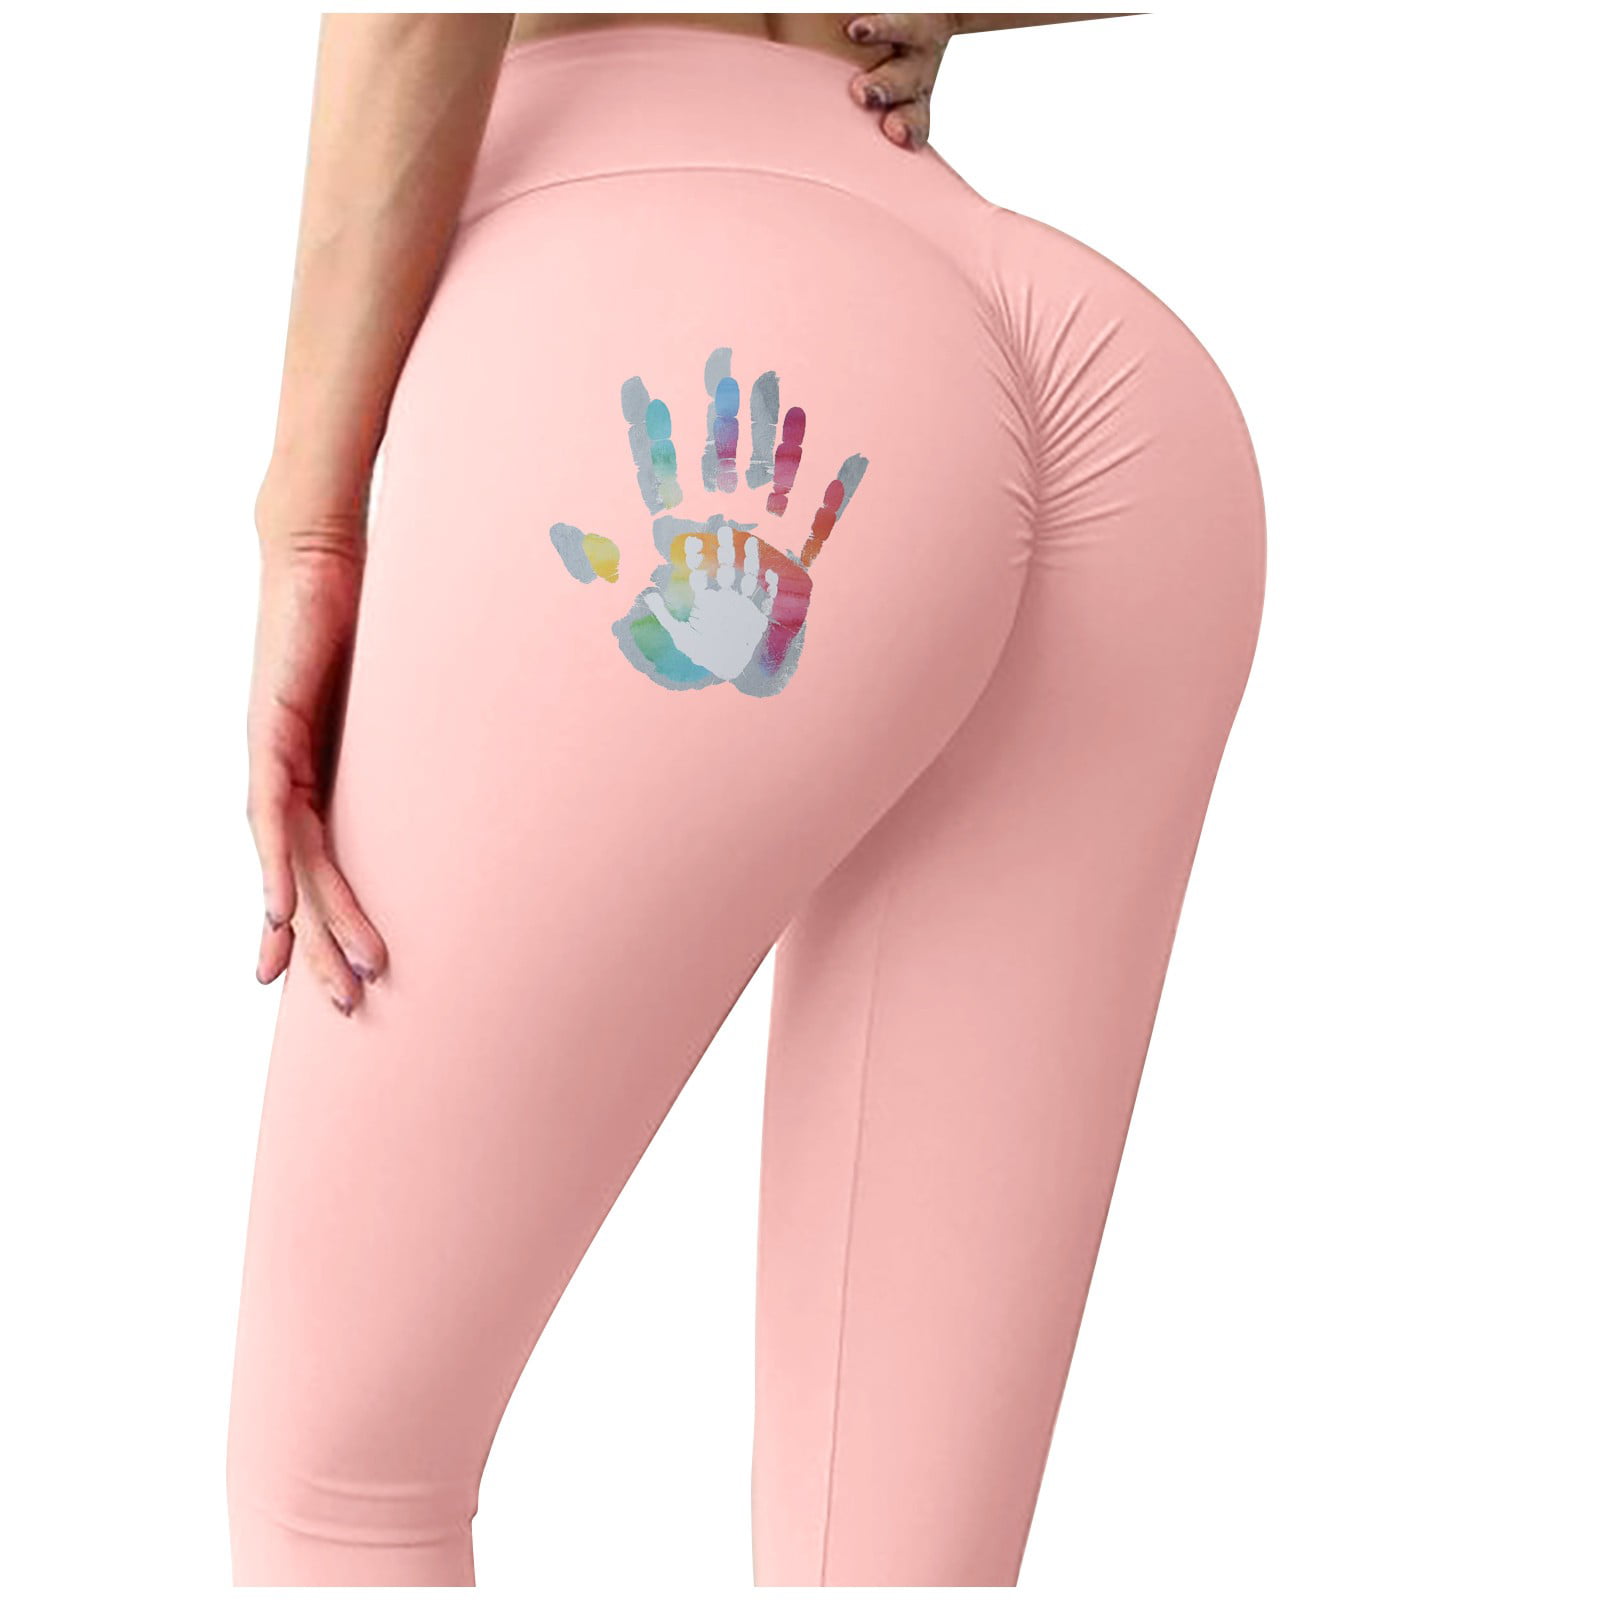 Gubotare Womens Yoga Pants Petite Women High Wasited Leggings with Pockets  Tummy Control Workout Yoga Pants,Hot Pink L